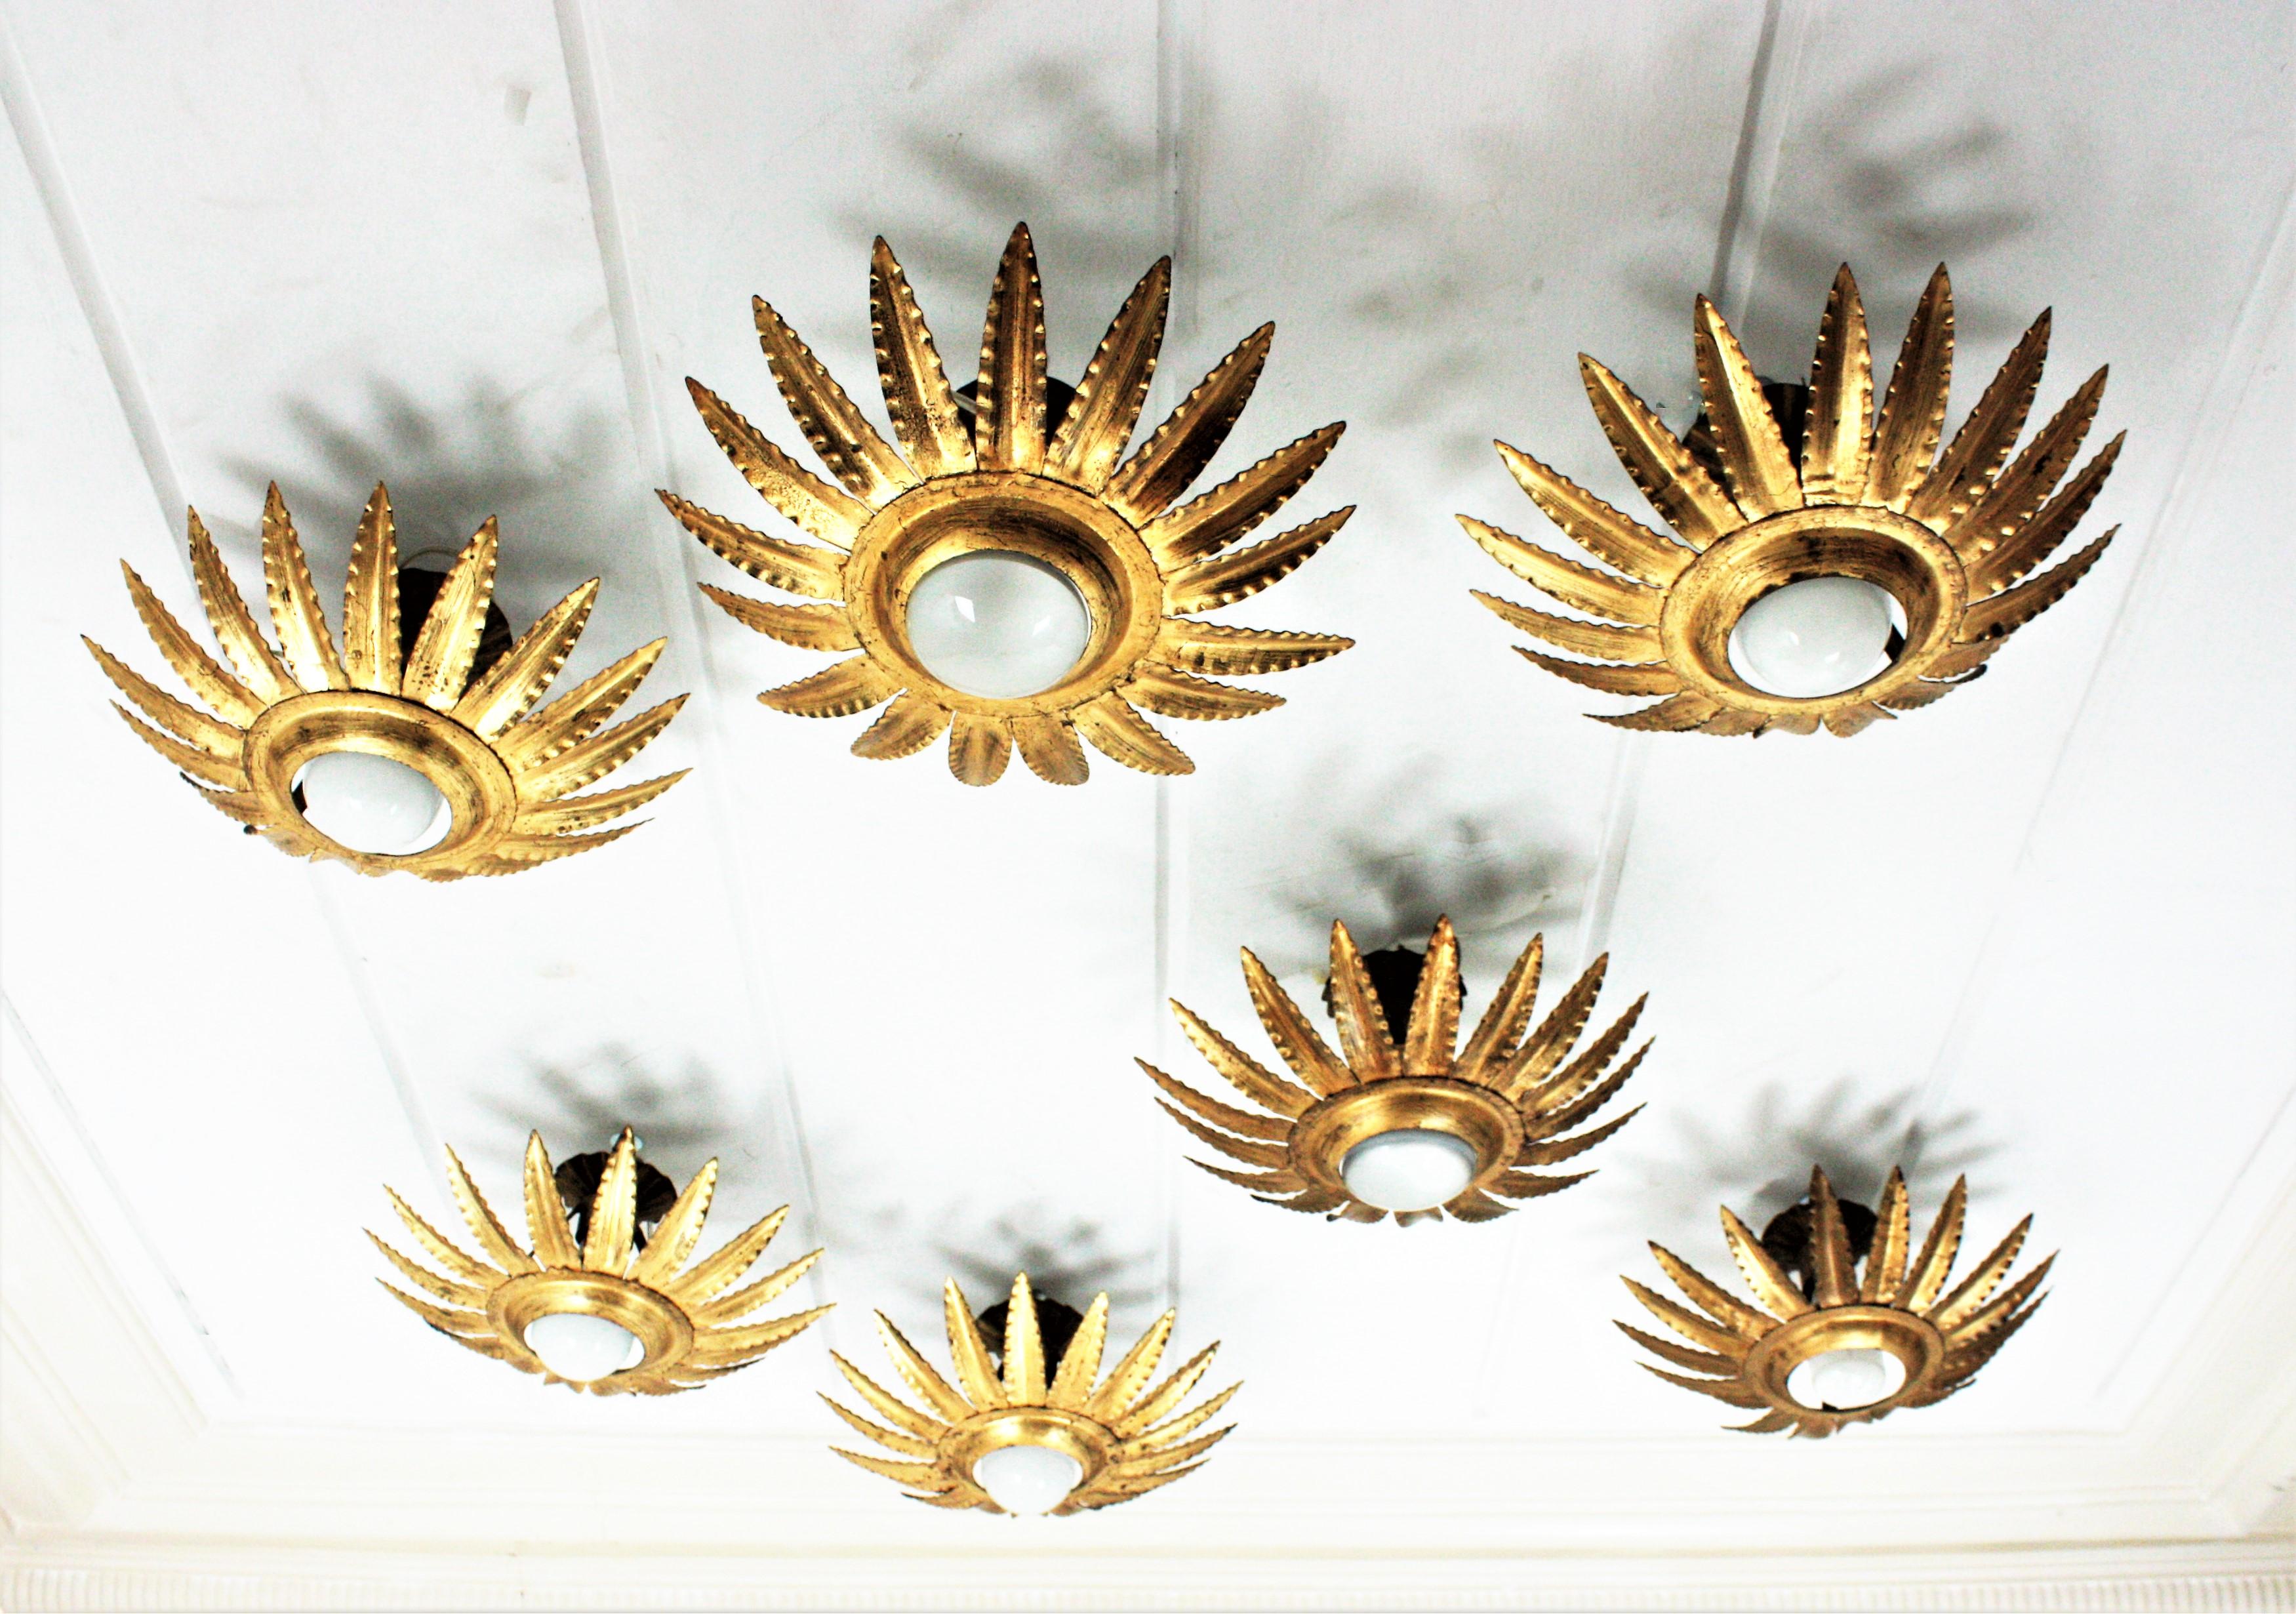 Set of seven sunburst starburst gil iron wall sconces or ceiling lights. Spain, 1960s.
These eye-caching light fixtures are handcrafted in gilt wrought. They have sunburst or flower shaped frames surrounding a central exposed bulb. Finished in gold